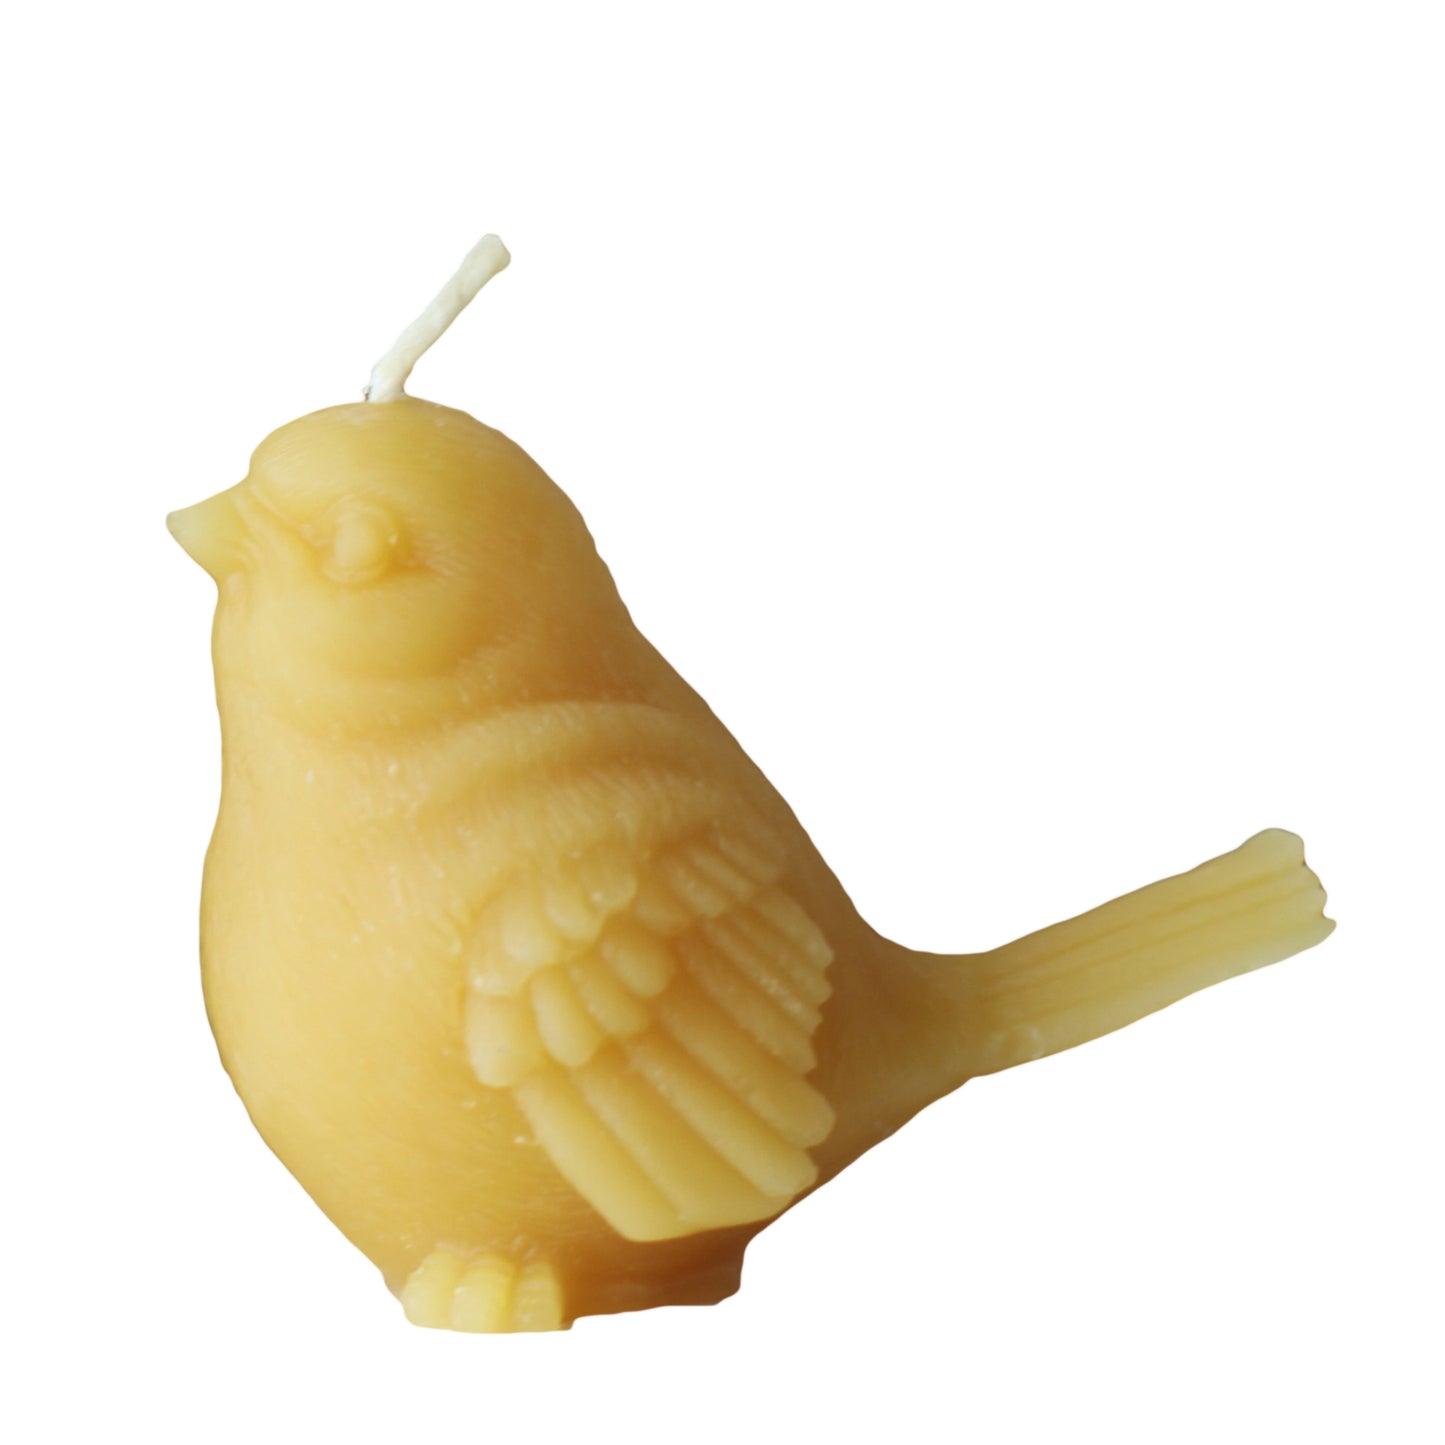 A product photo of a small bird beeswax candle in the shape of a sparrow on a white background.